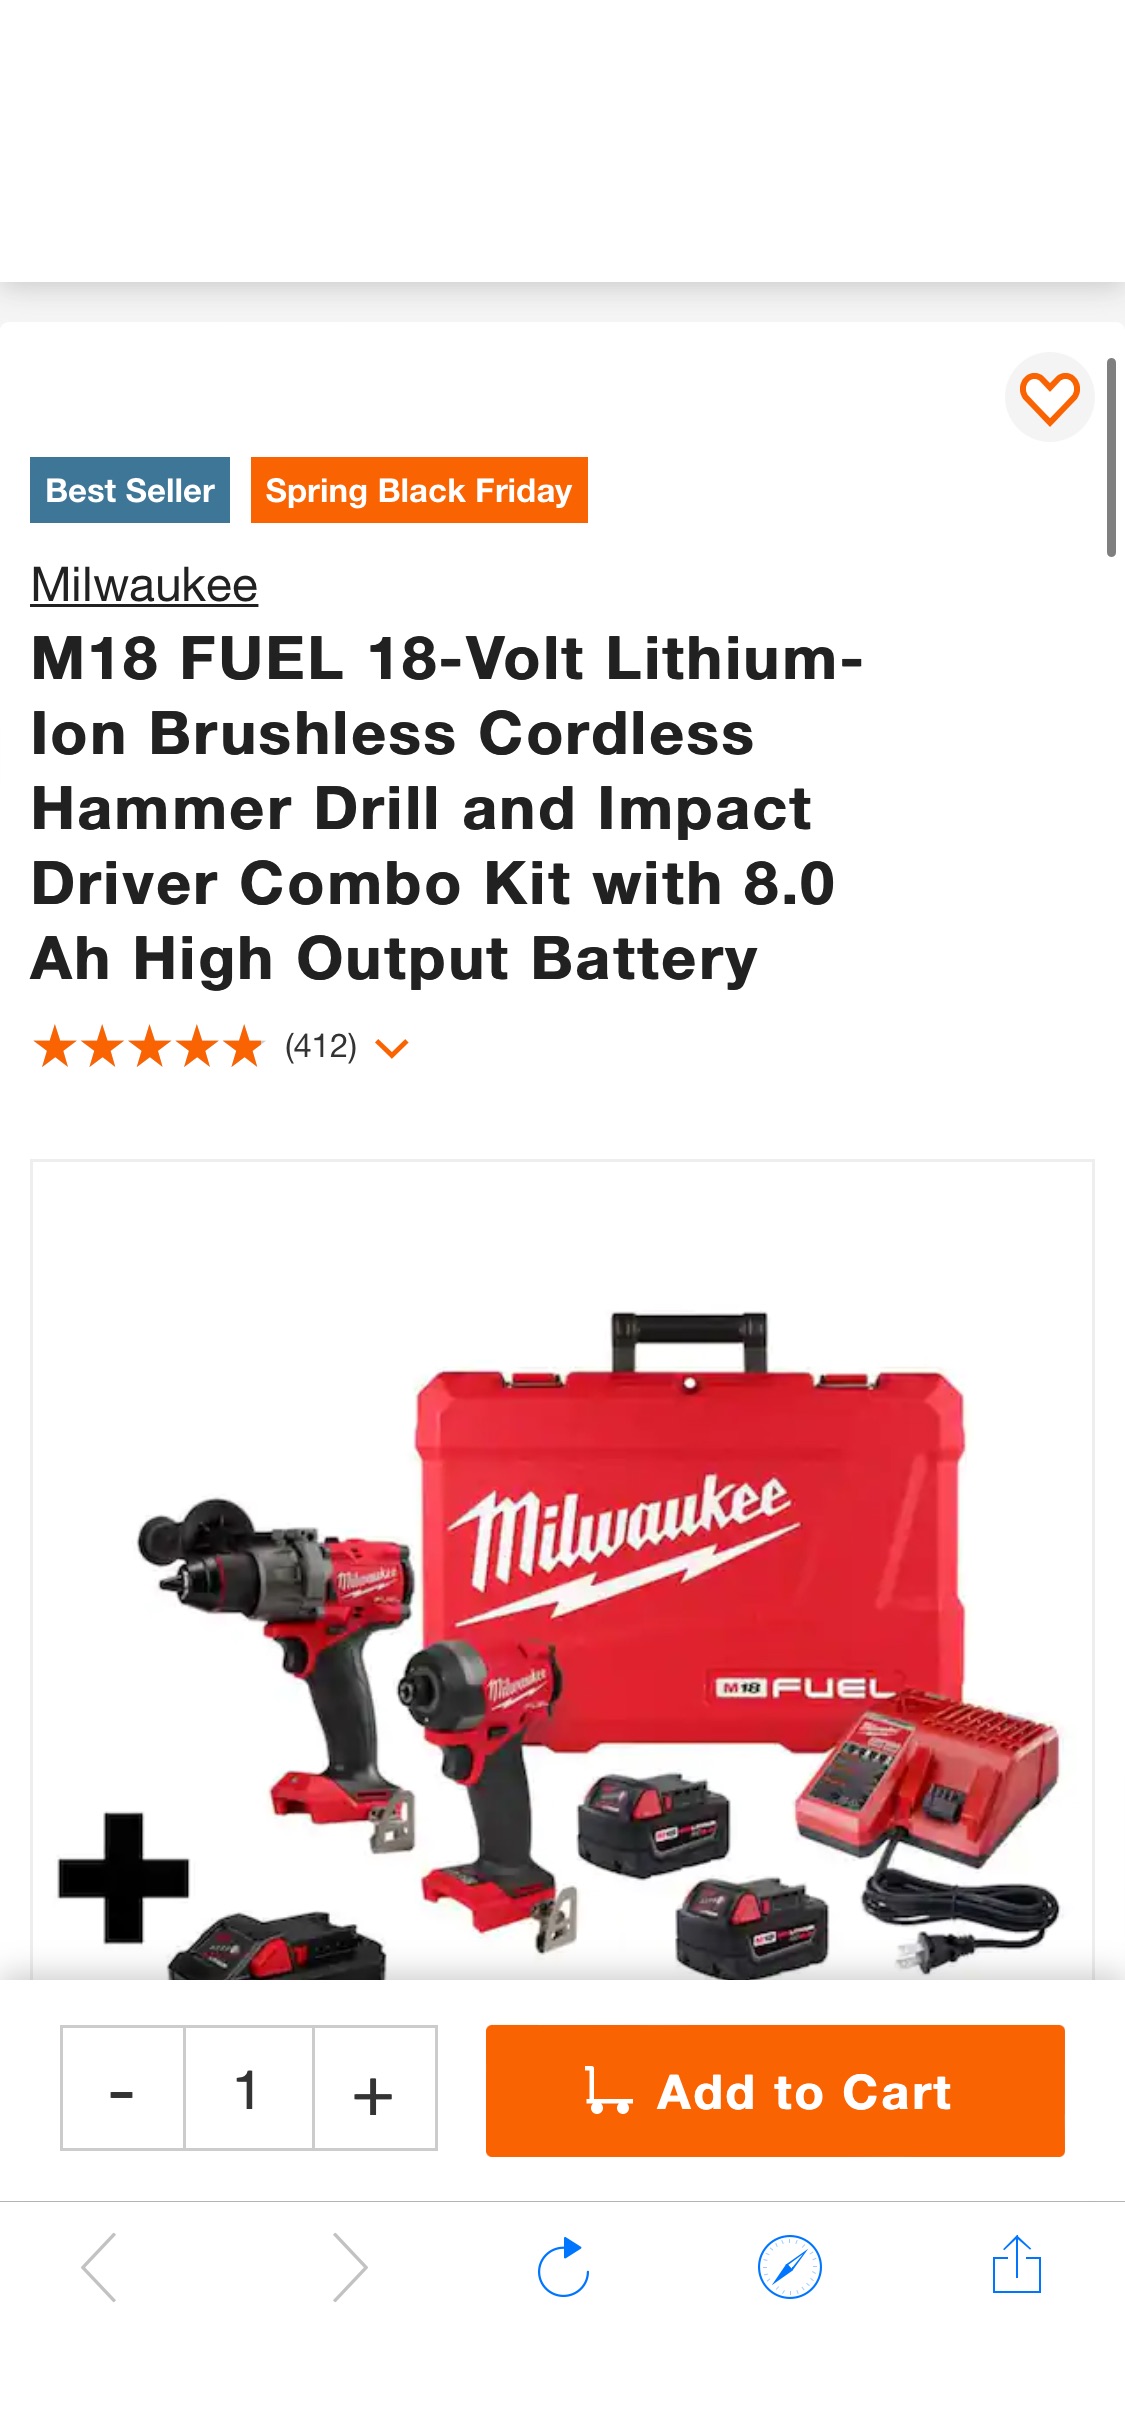 Milwaukee M18 FUEL 18-Volt Lithium-Ion Brushless Cordless Hammer Drill and Impact Driver Combo Kit with 8.0 Ah High Output Battery 3697-22-48-11-1880 - The Home Depot